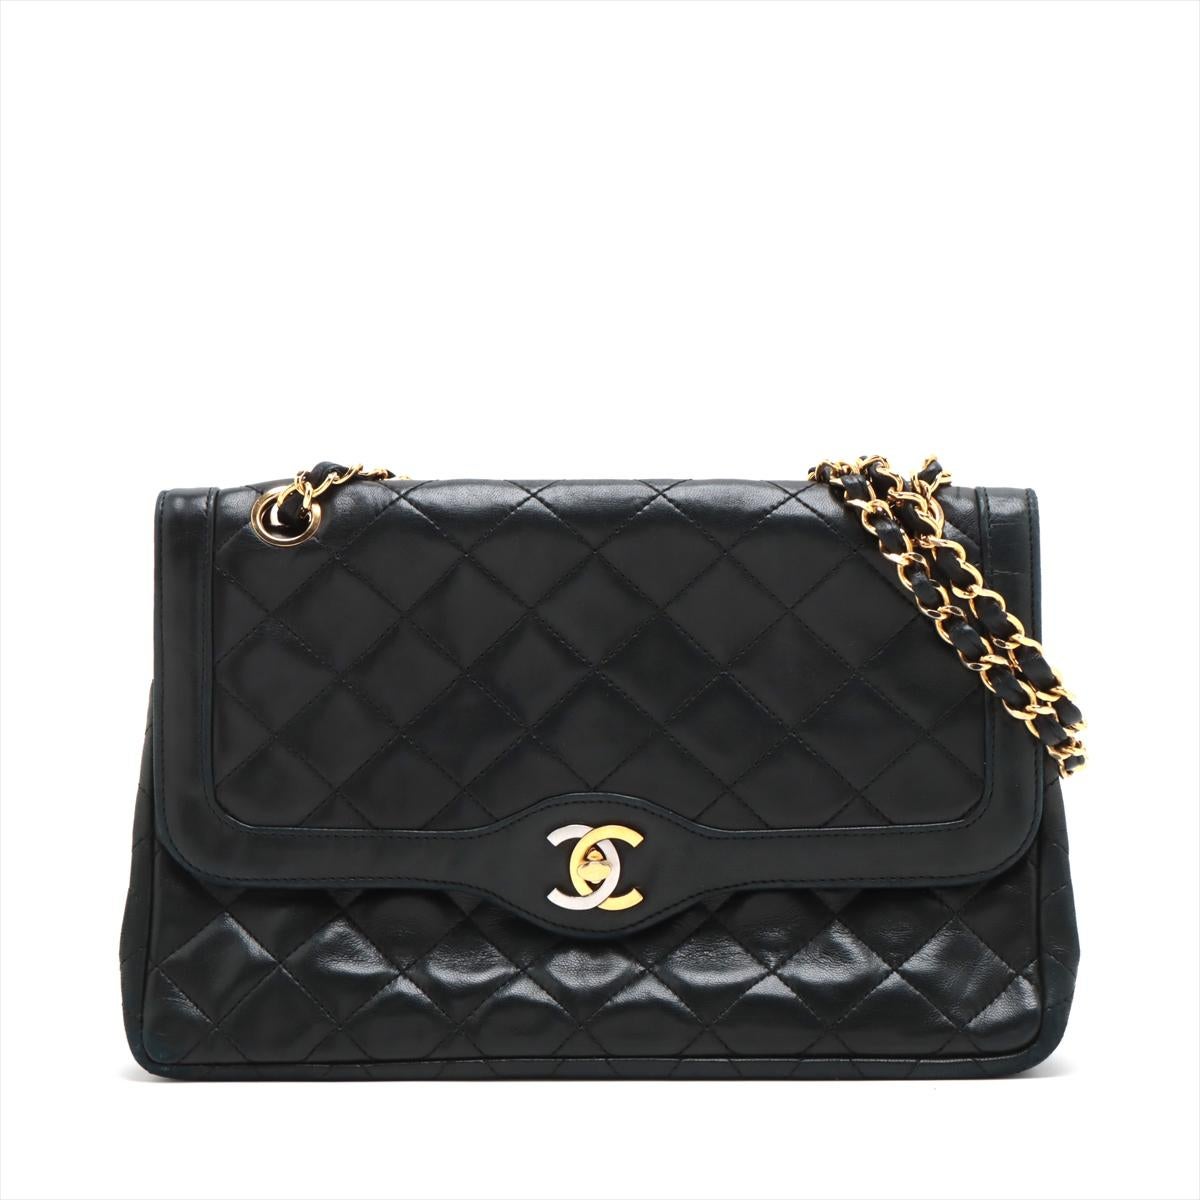 The Chanel Matelasse Lambskin Paris Double Flap Double Chain Bag in Black is an iconic and timeless accessory that epitomizes Chanel's legacy of luxury and elegance. Meticulously crafted, the classic double flap bag is made from sumptuous lambskin